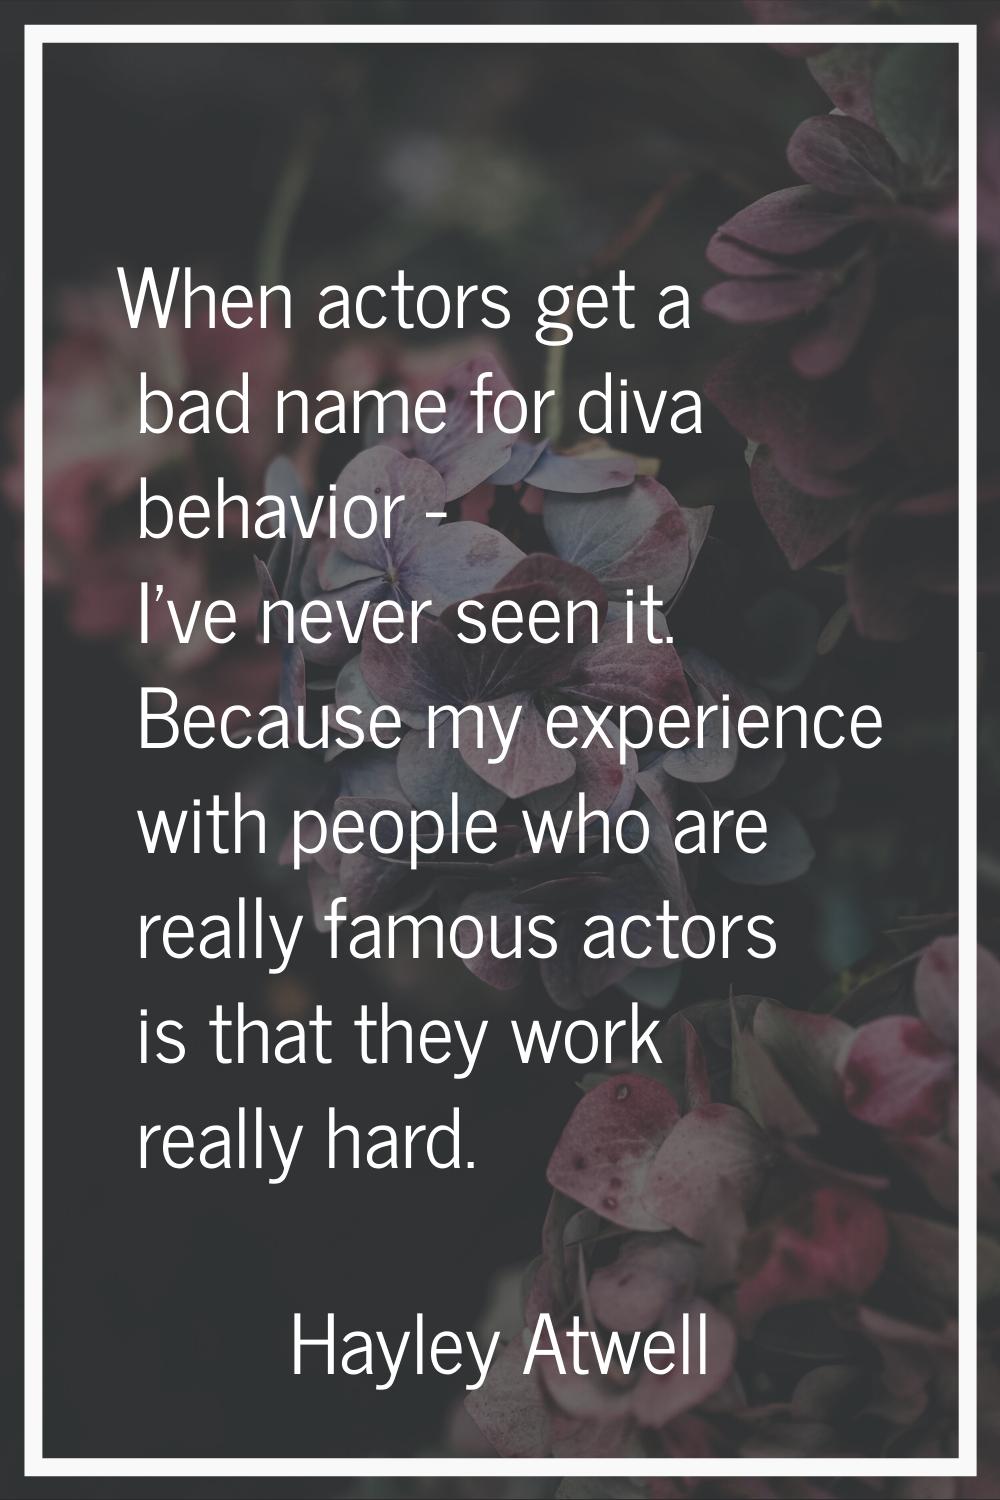 When actors get a bad name for diva behavior - I've never seen it. Because my experience with peopl